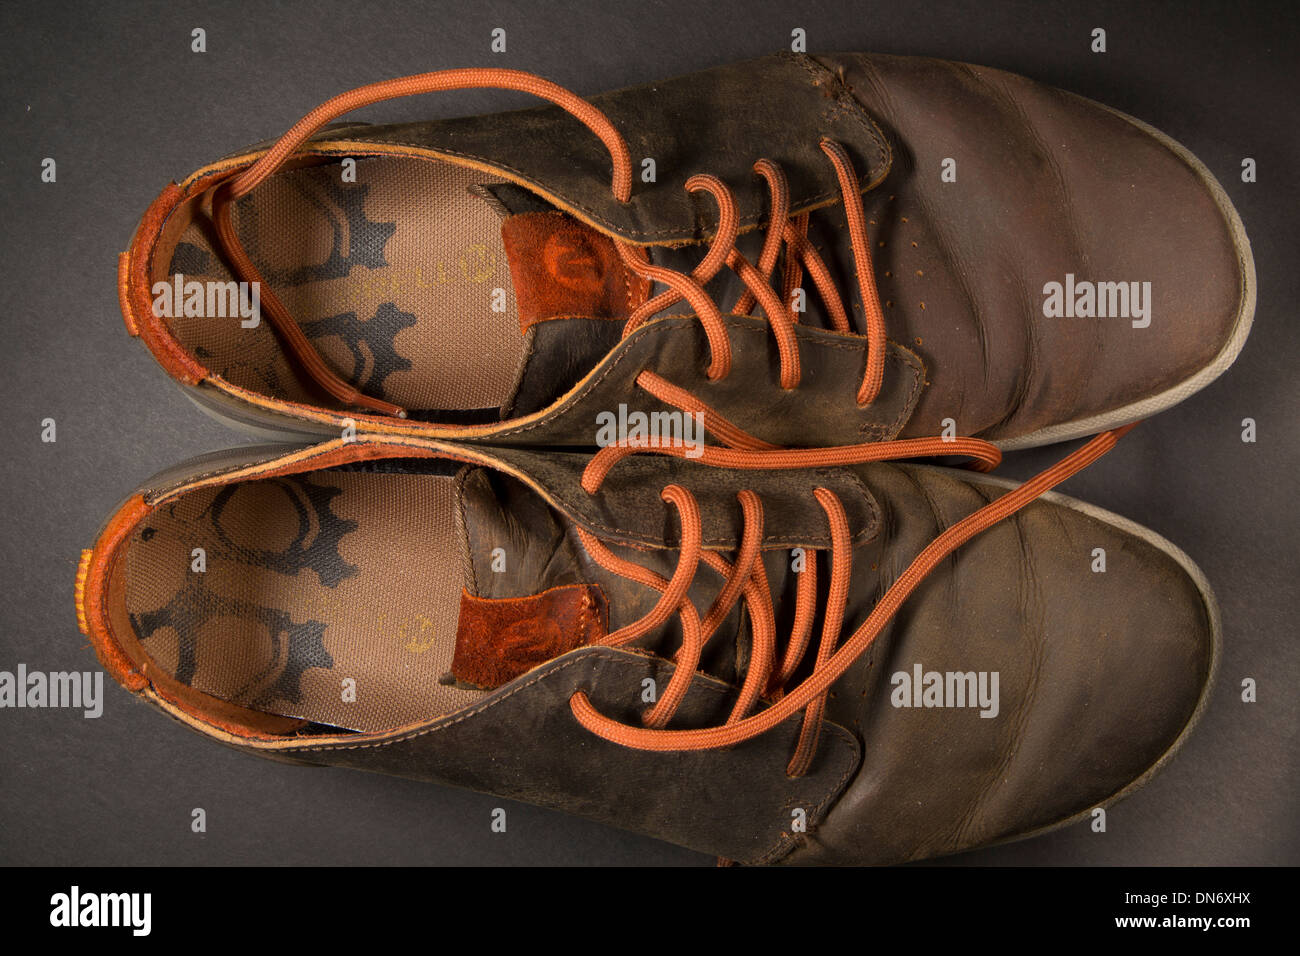 Pair of comfortable Merrell shoes, brown with orange laces Stock Photo -  Alamy